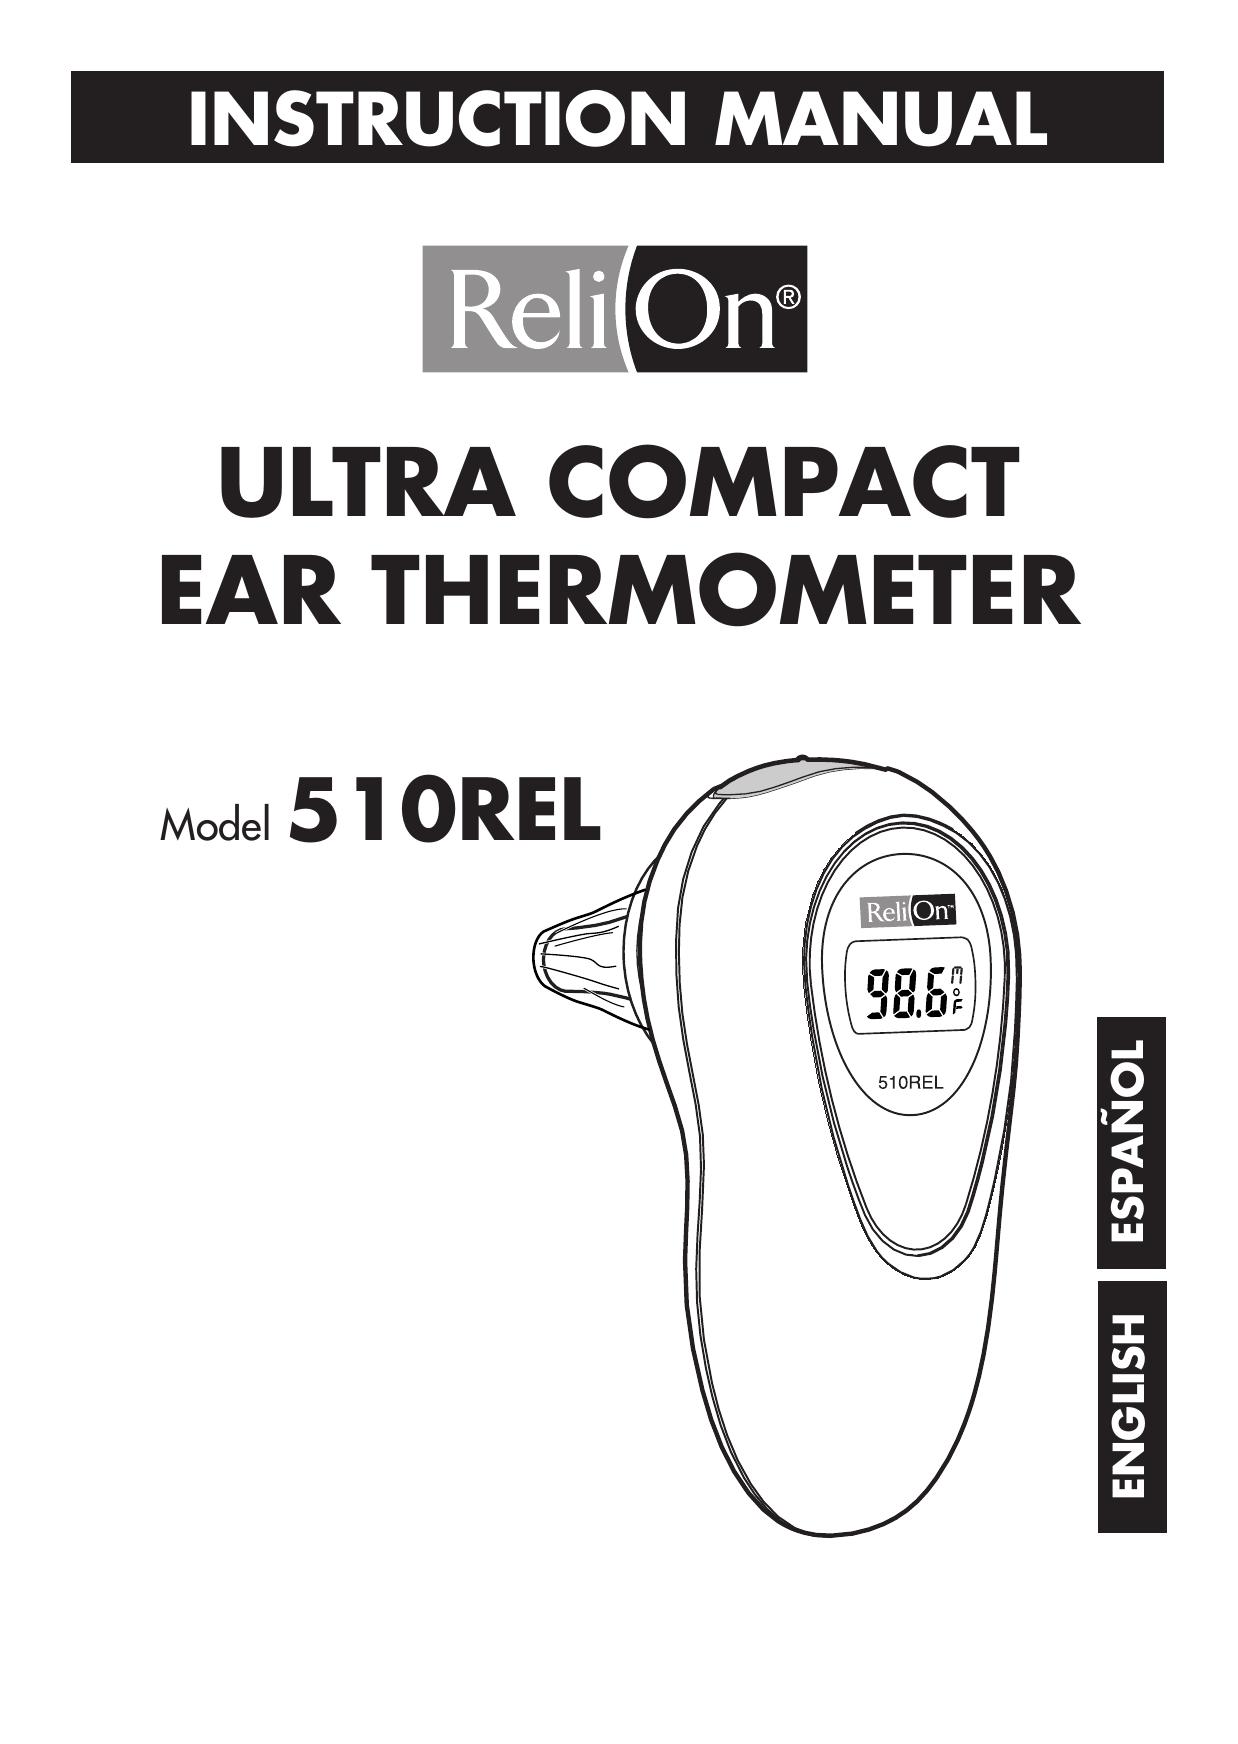 ReliOn 510REL Thermometer User Manual